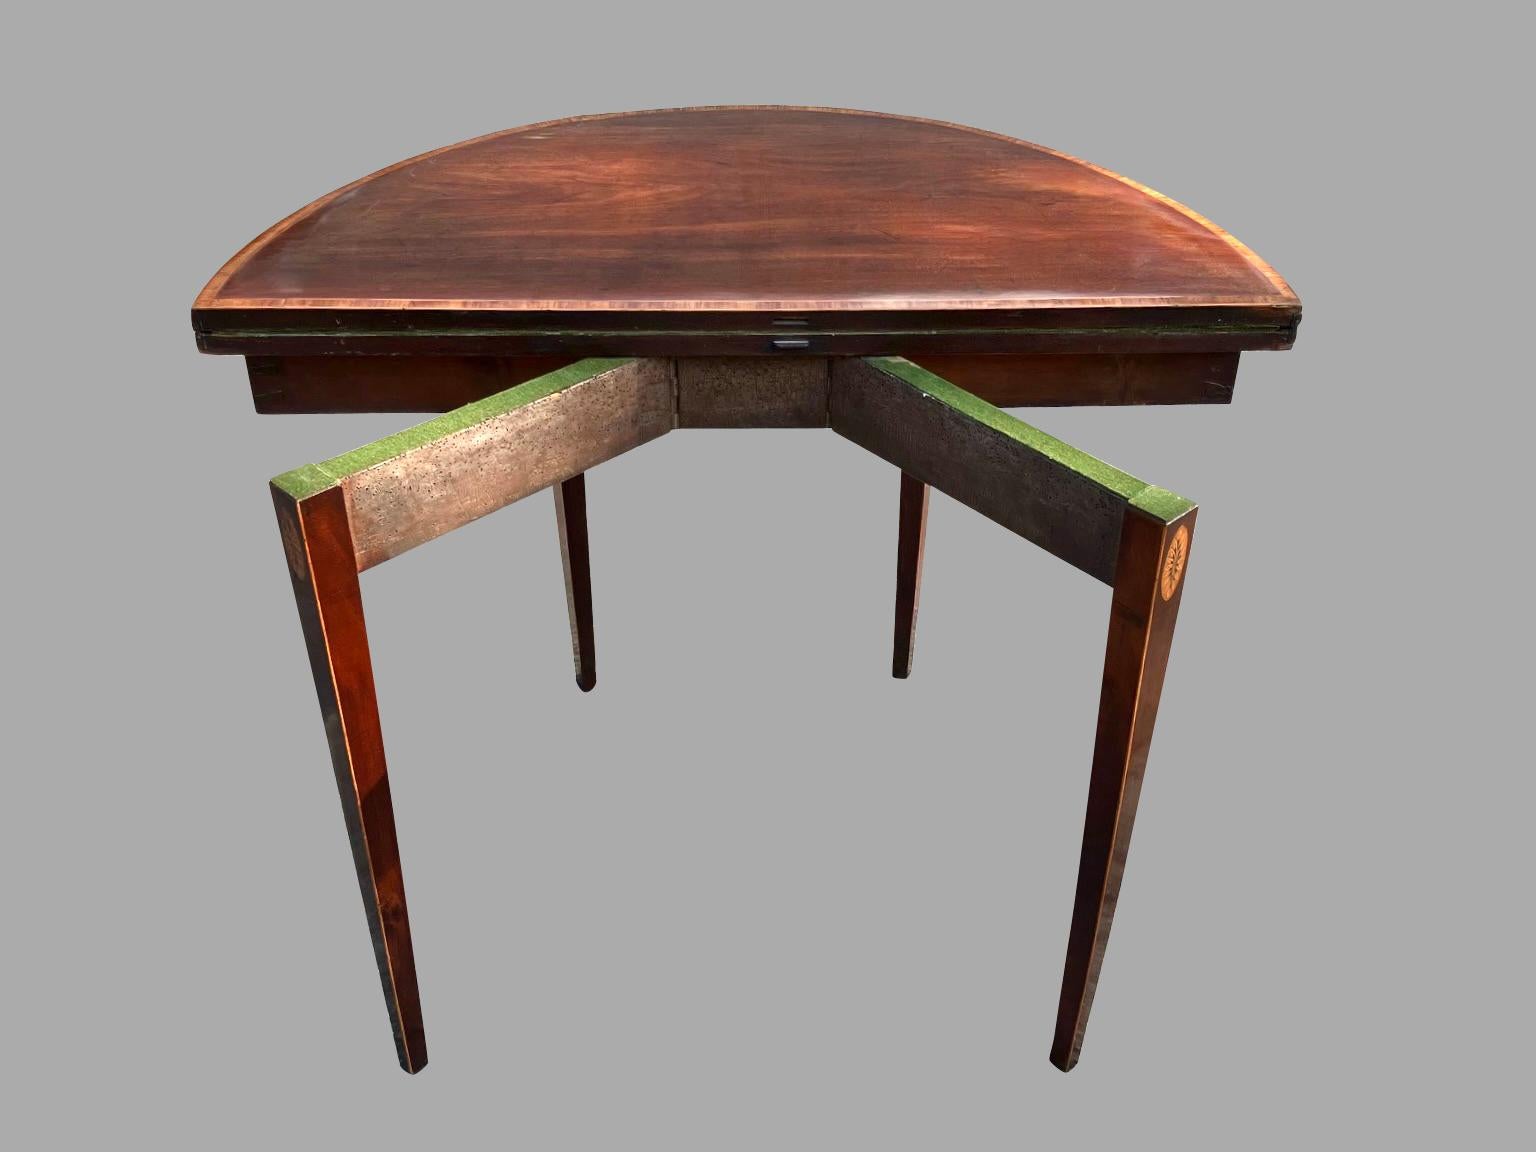 English Hepplewhite Satinwood Inlaid Mahogany Demilune Games Table Circa 1790 In Good Condition For Sale In San Francisco, CA